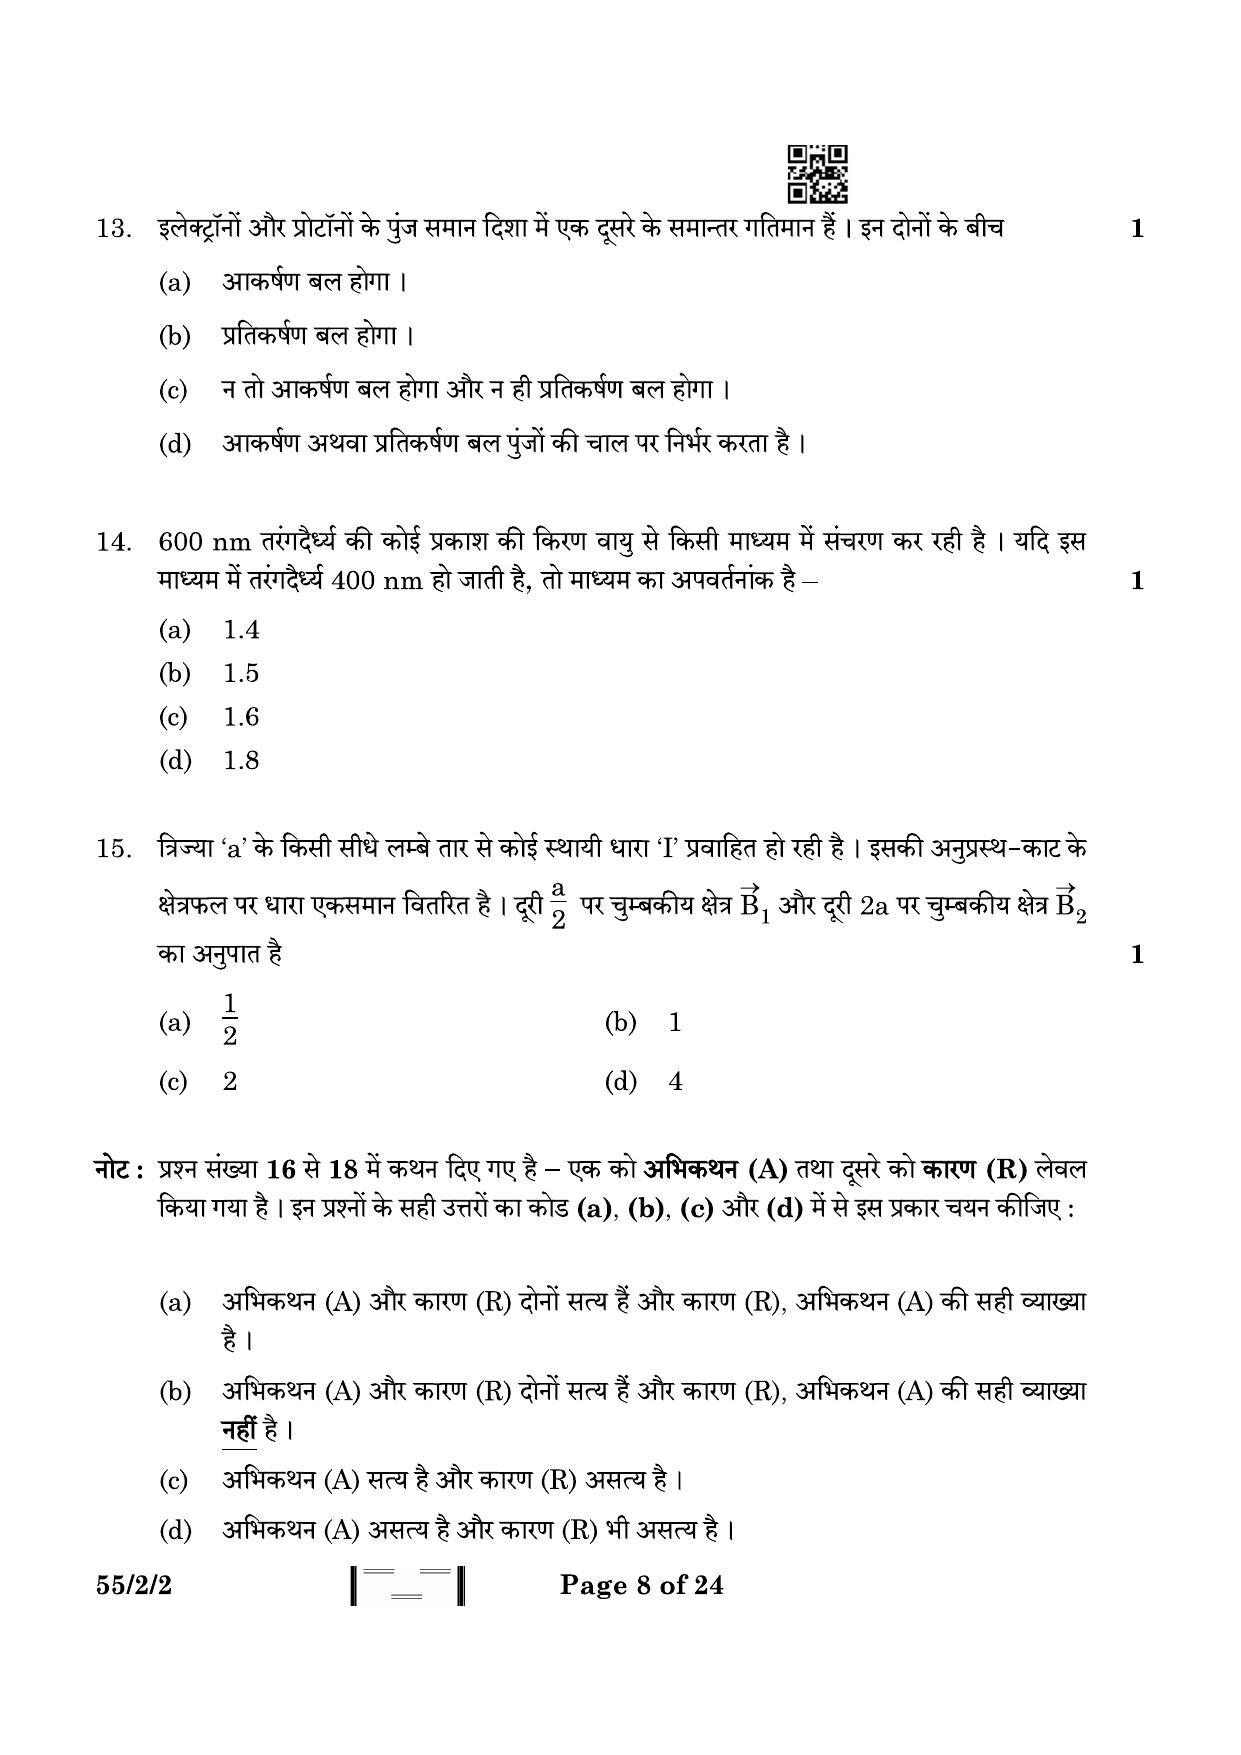 CBSE Class 12 55-2-2 Physics 2023 Question Paper - Page 8